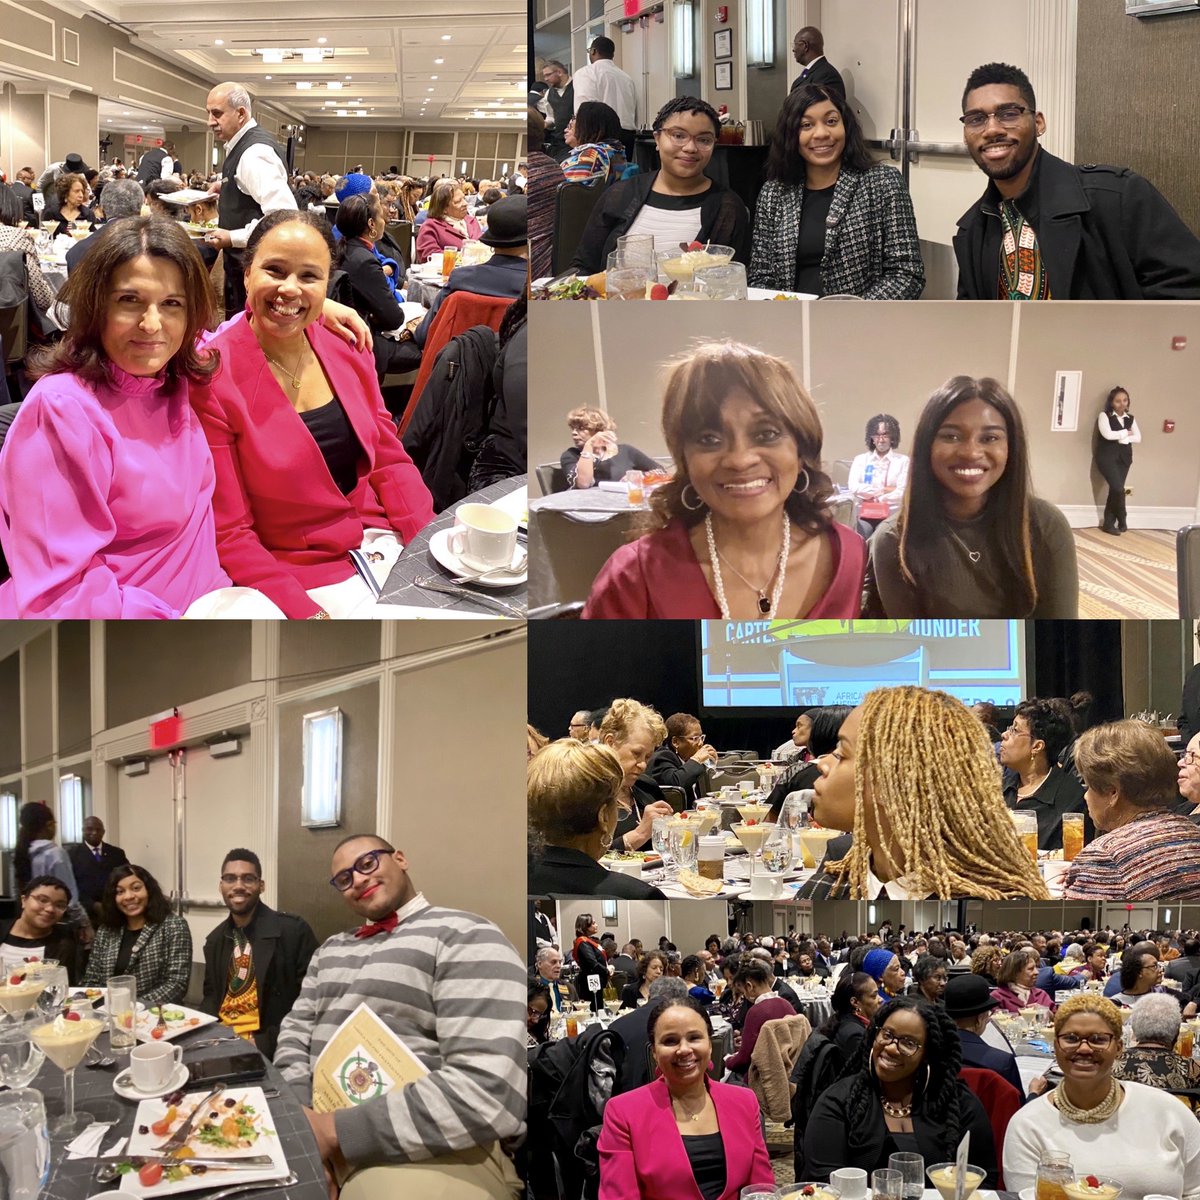 Faculty, students, and staff of @HowardU @HowardUHistory marked their presence in the 94th Annual Black History Luncheon by @ASALH held in Washington DC, today, February 22, 2020. Thank you all who came to support ASALH! #CarterGWoodson #blackhistoryluncheon